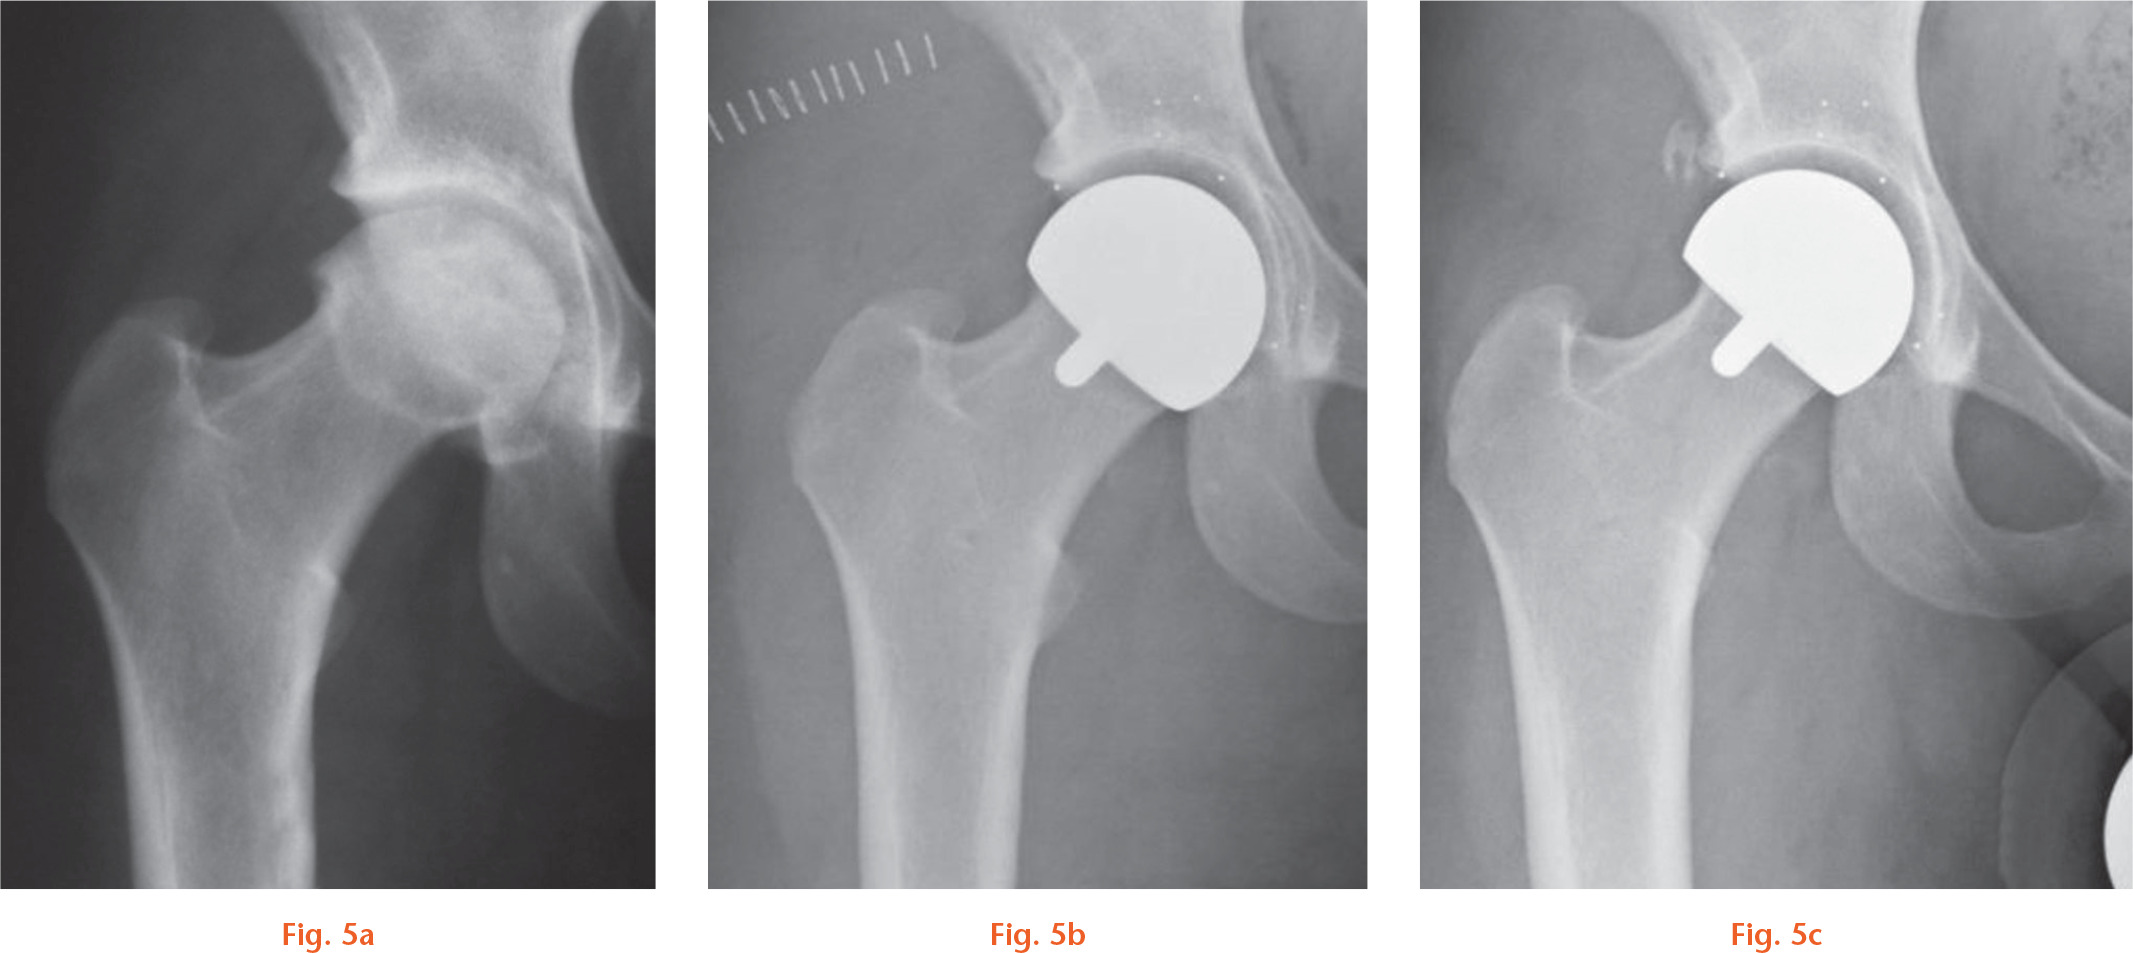 Fig. 5 
          Radiological series of a 21-year-old female university student: a) preoperatively; b) at two days; and c) at one year. She presented with post-Perthes’ disease bilateral painful hips, with her right hip being the most troublesome. Her presenting condition and young age made her an ideal candidate for a bone-conserving procedure. A custom crosslinked-polyethylene resurfacing was performed with 42 mm/48 mm components. At one year, she was back to sporting activity and has started a career.
        